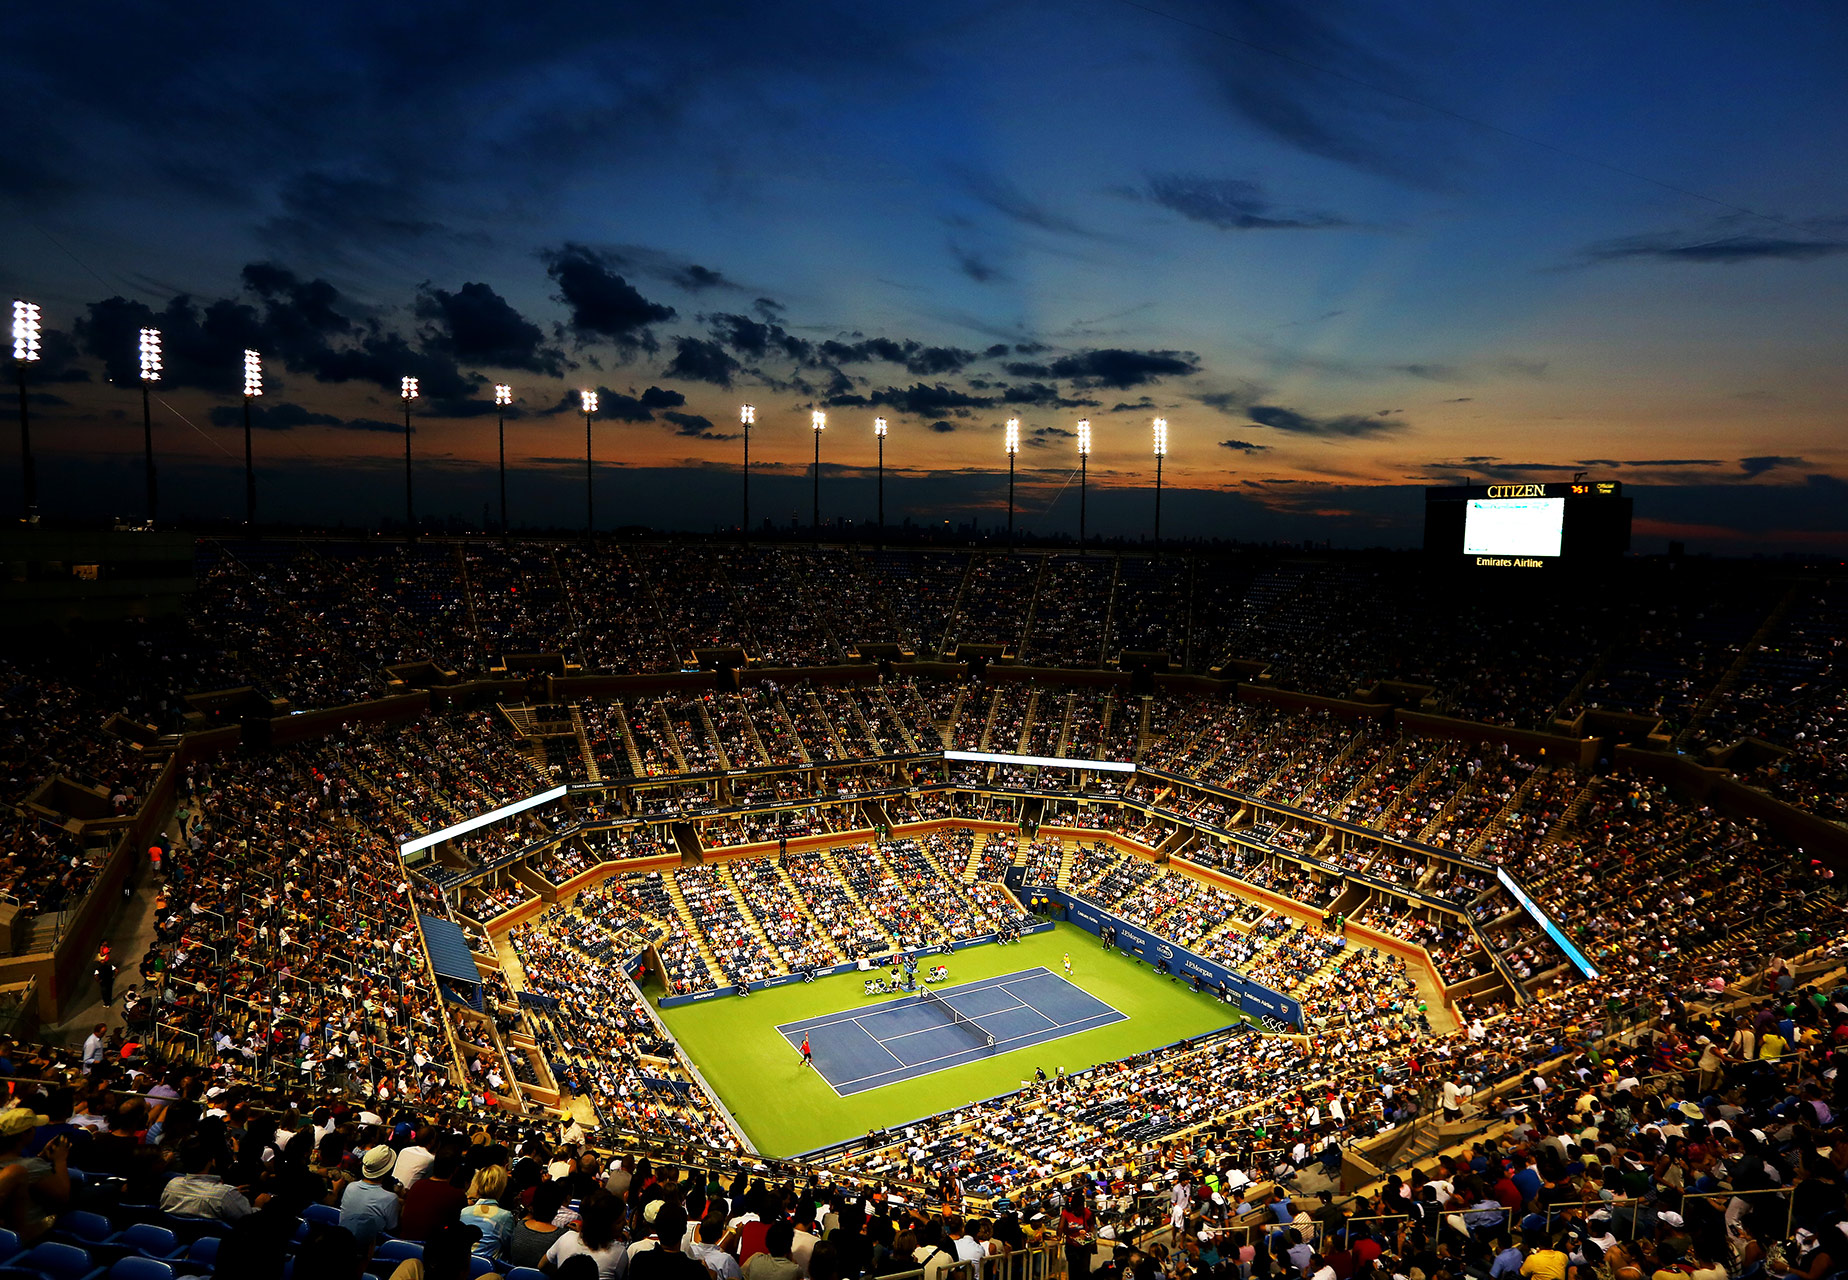 US Open-US Open Tennis Championship: Session 11 - Men's/Women's 3rd Round tickets price and order